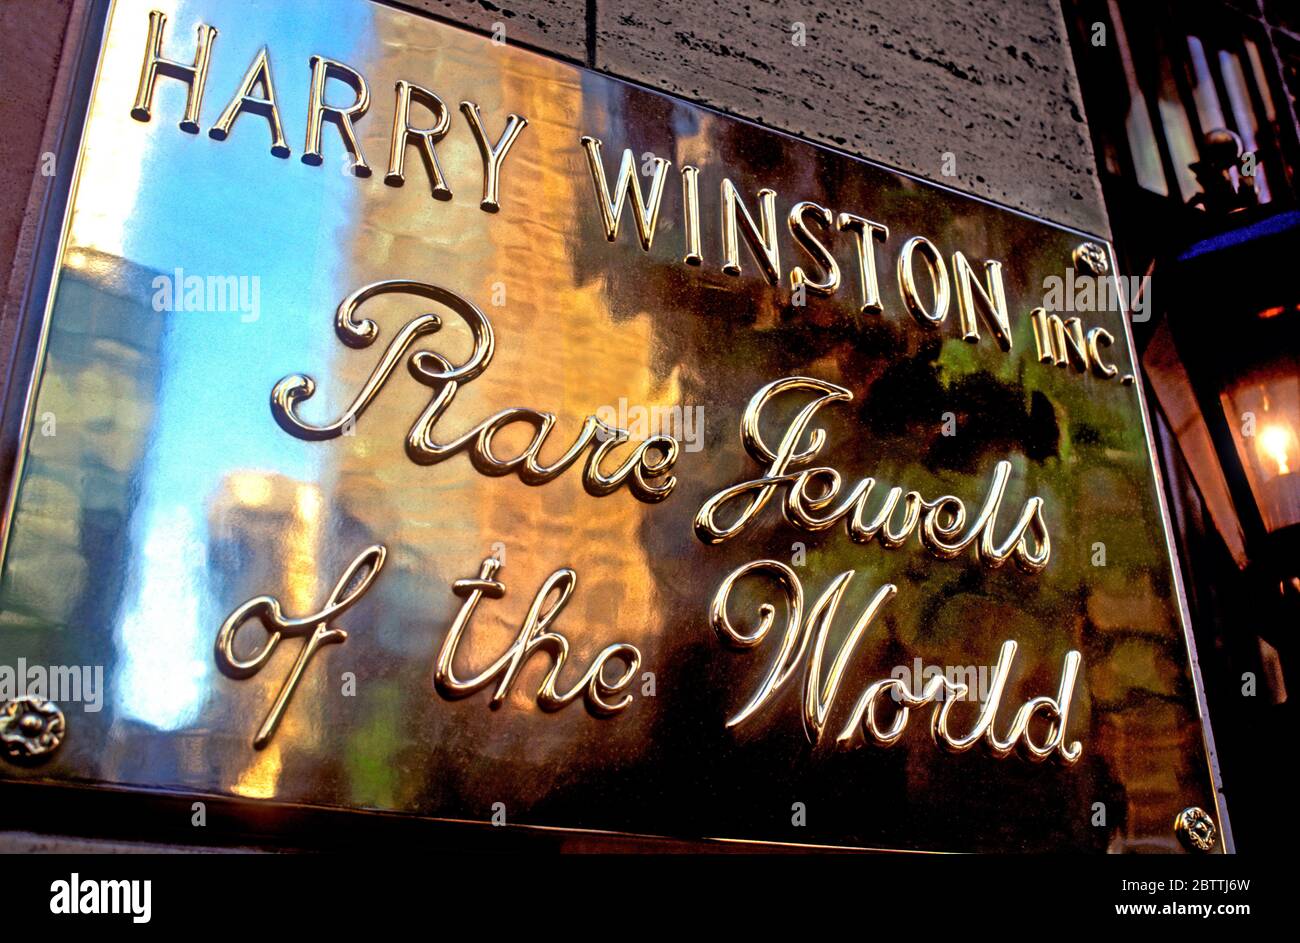 Harry Winston inc. brass plaque outside entrance to New York Jewellery Store ‘Rare Jewels of the World’ 5th Avenue Manhattan NY USA Stock Photo